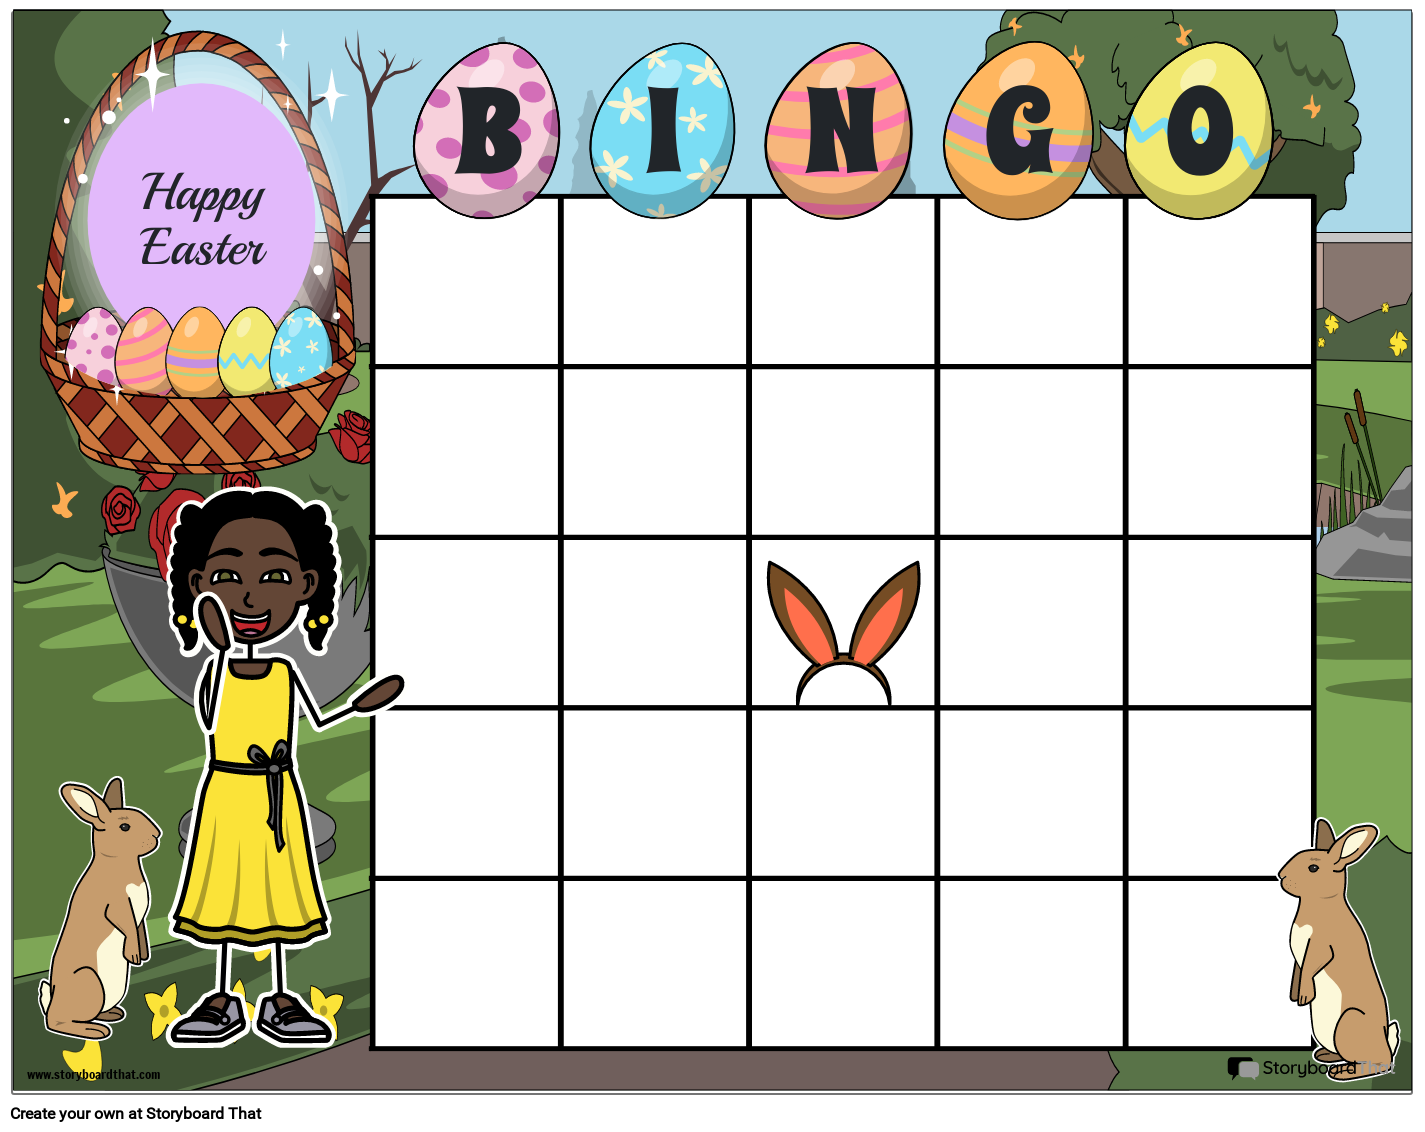 happy-easter-egg-hunt-board-game-storyboard-by-templates